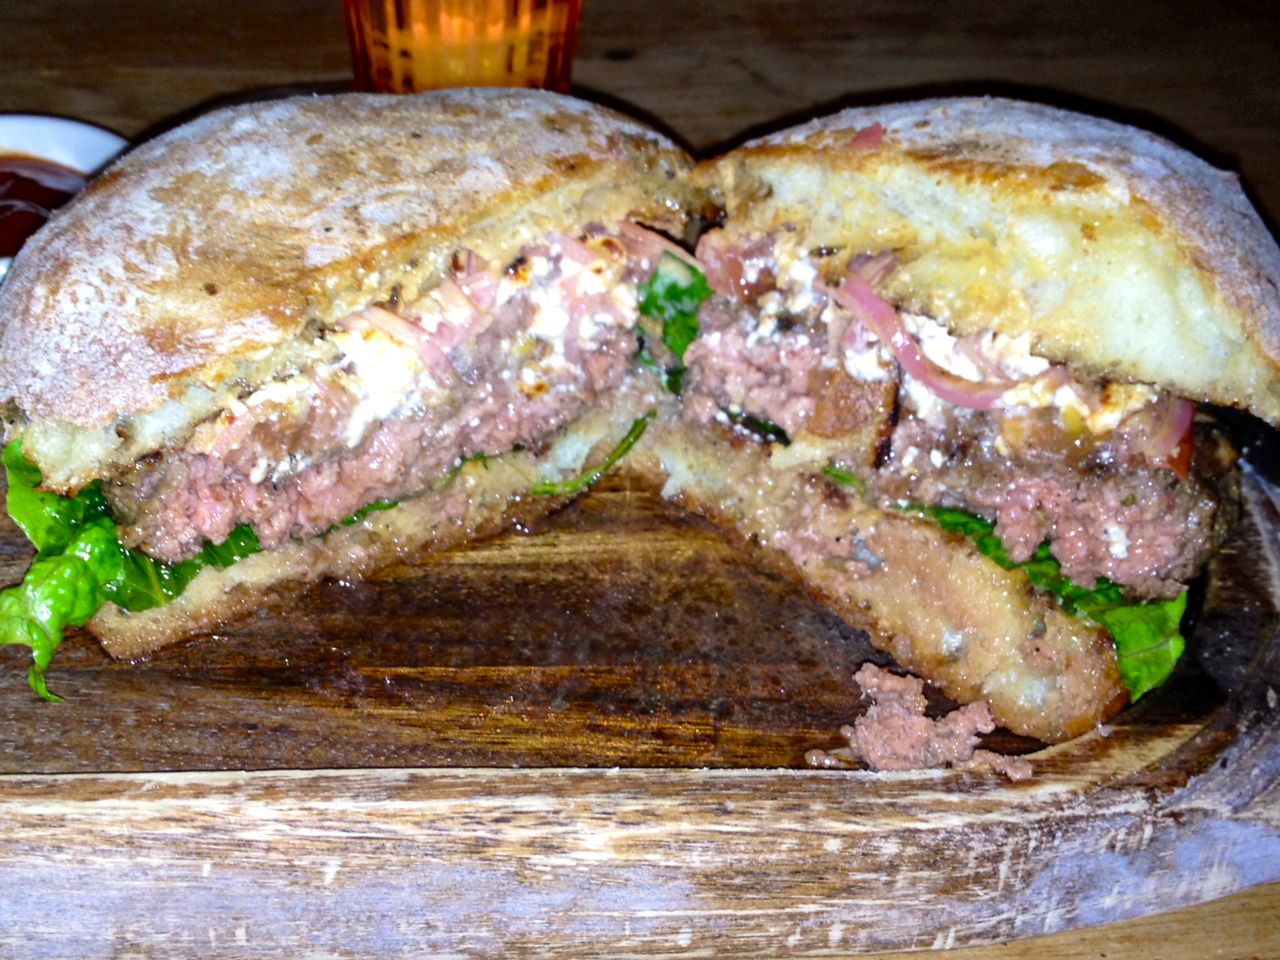 Burger Bedlam: A Search for the Best Burger in NYC - Best Burgers in